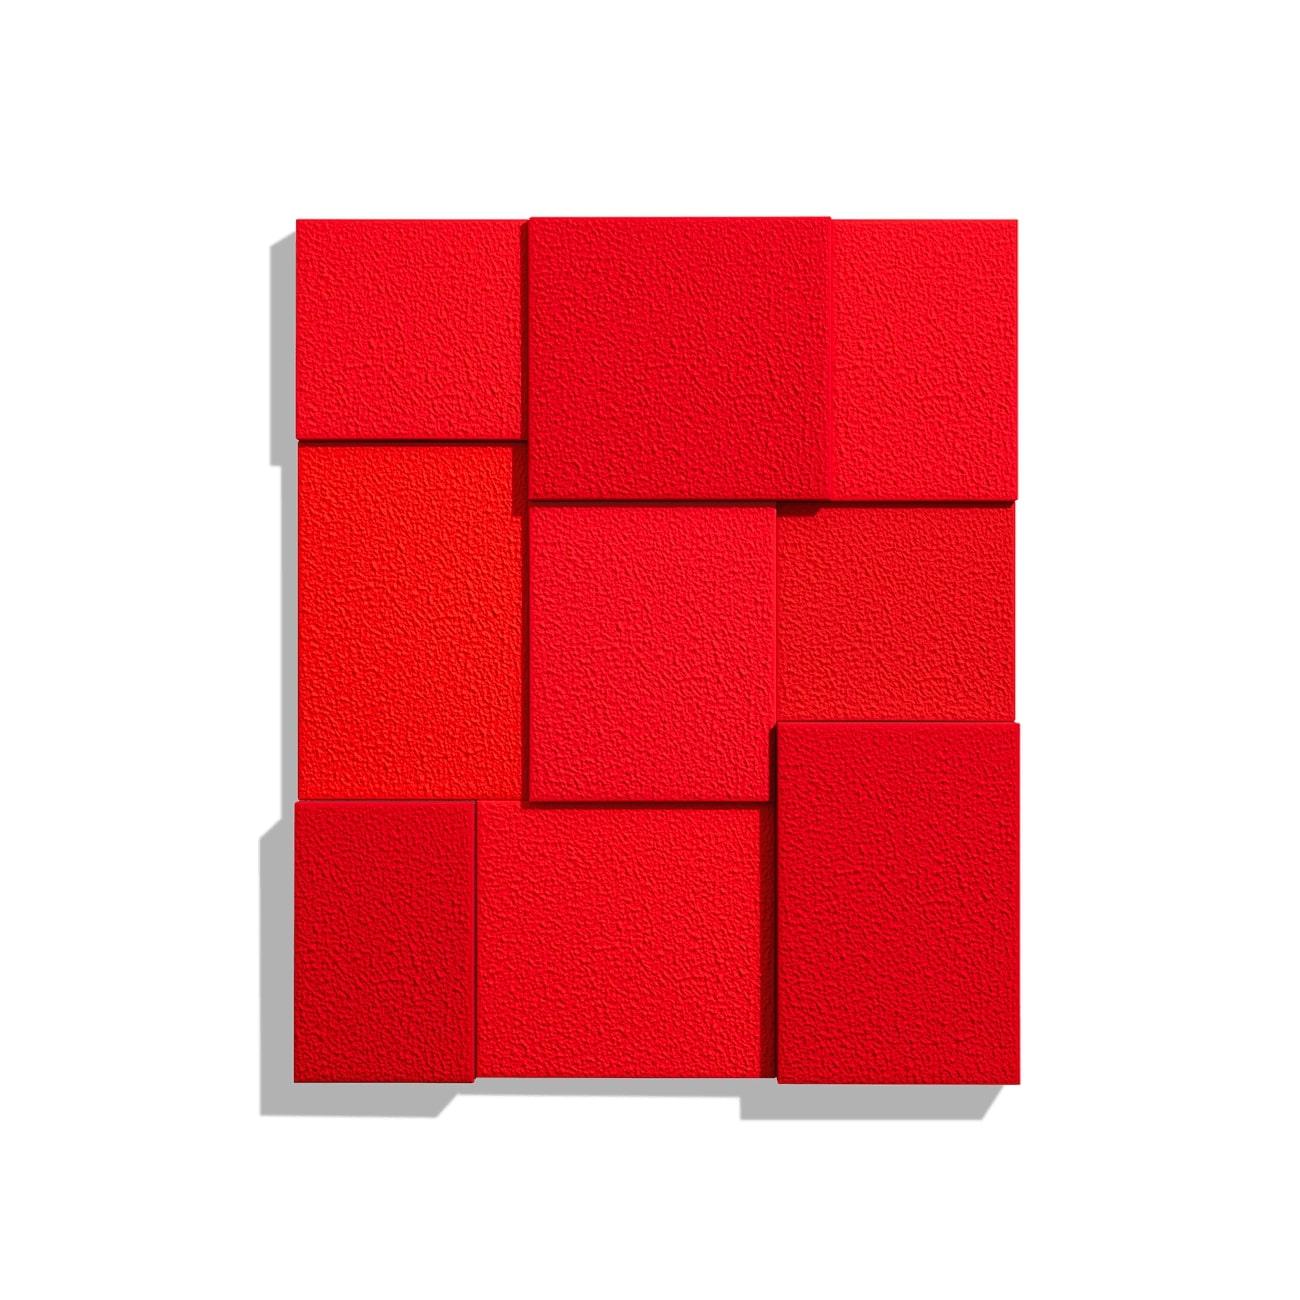 Red, Nine Times - Print by Peter Halley